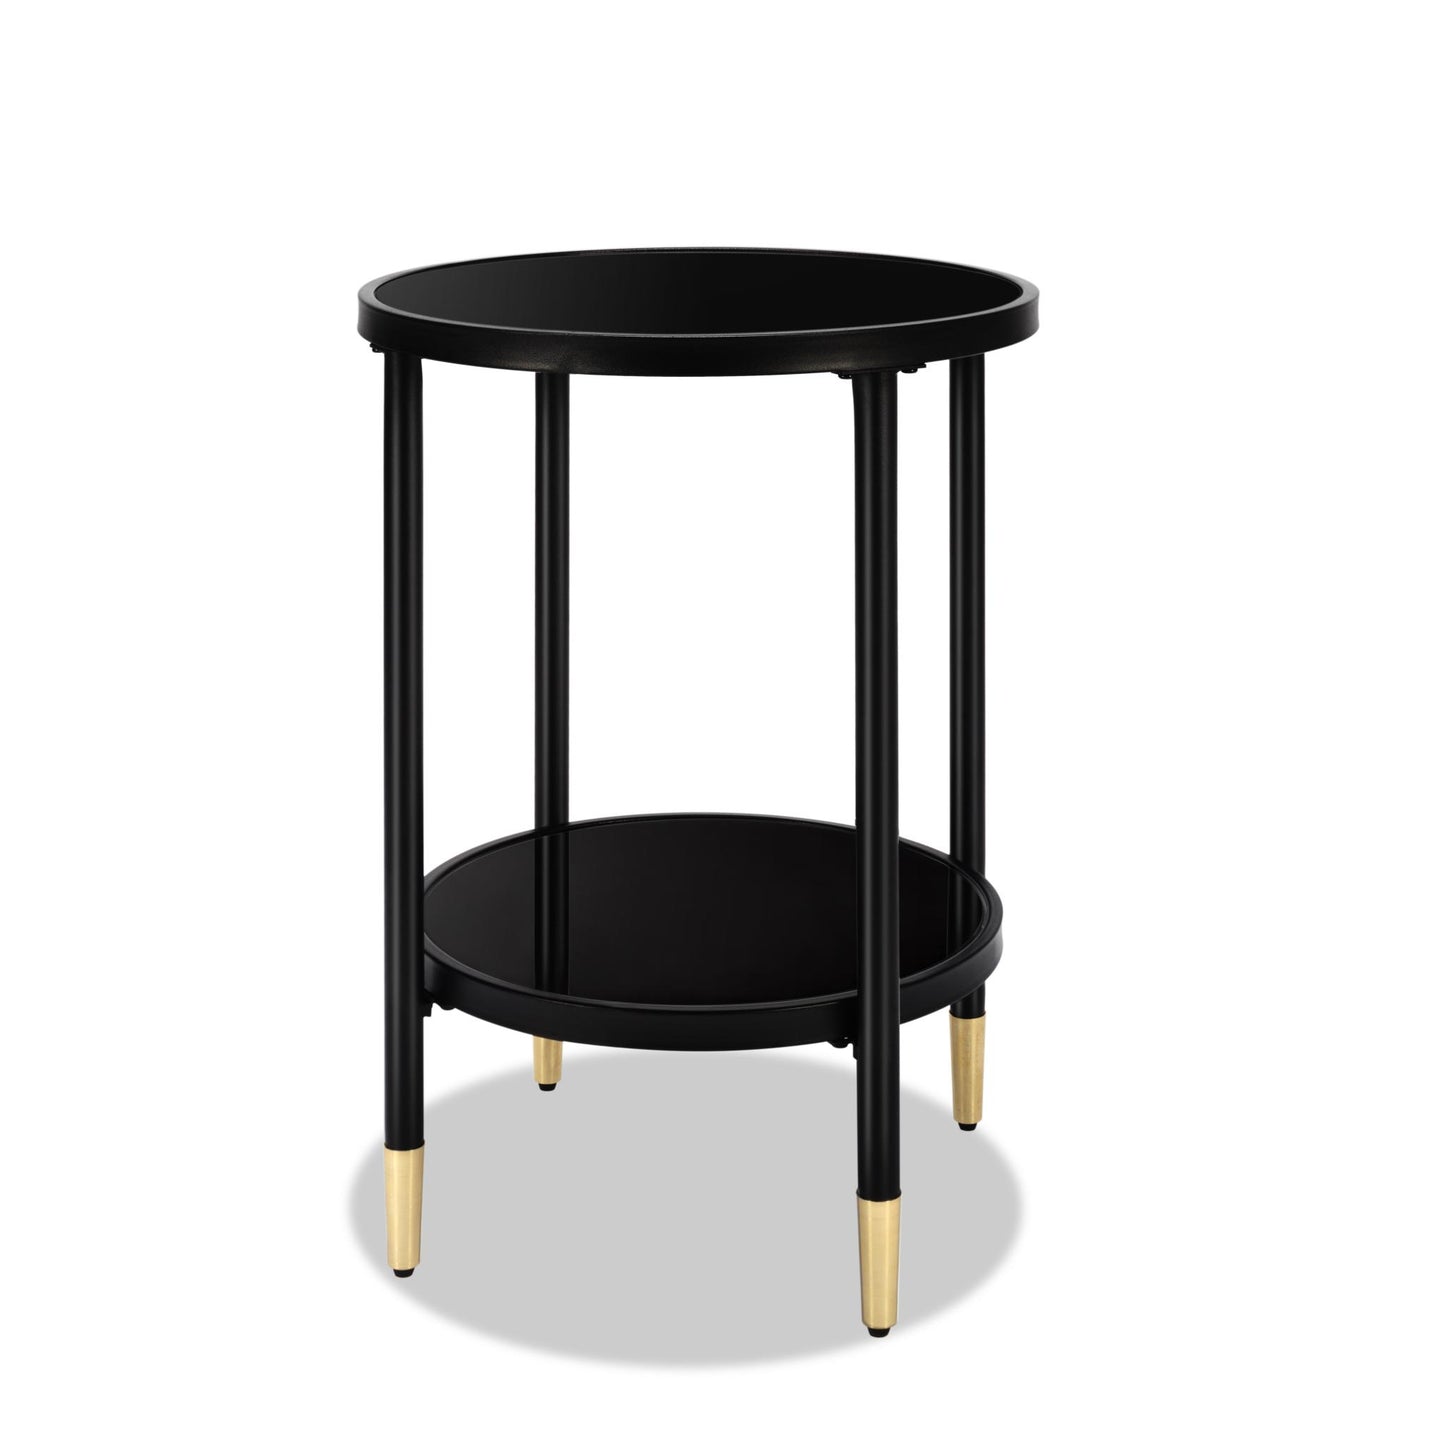 17.7” Round End Table